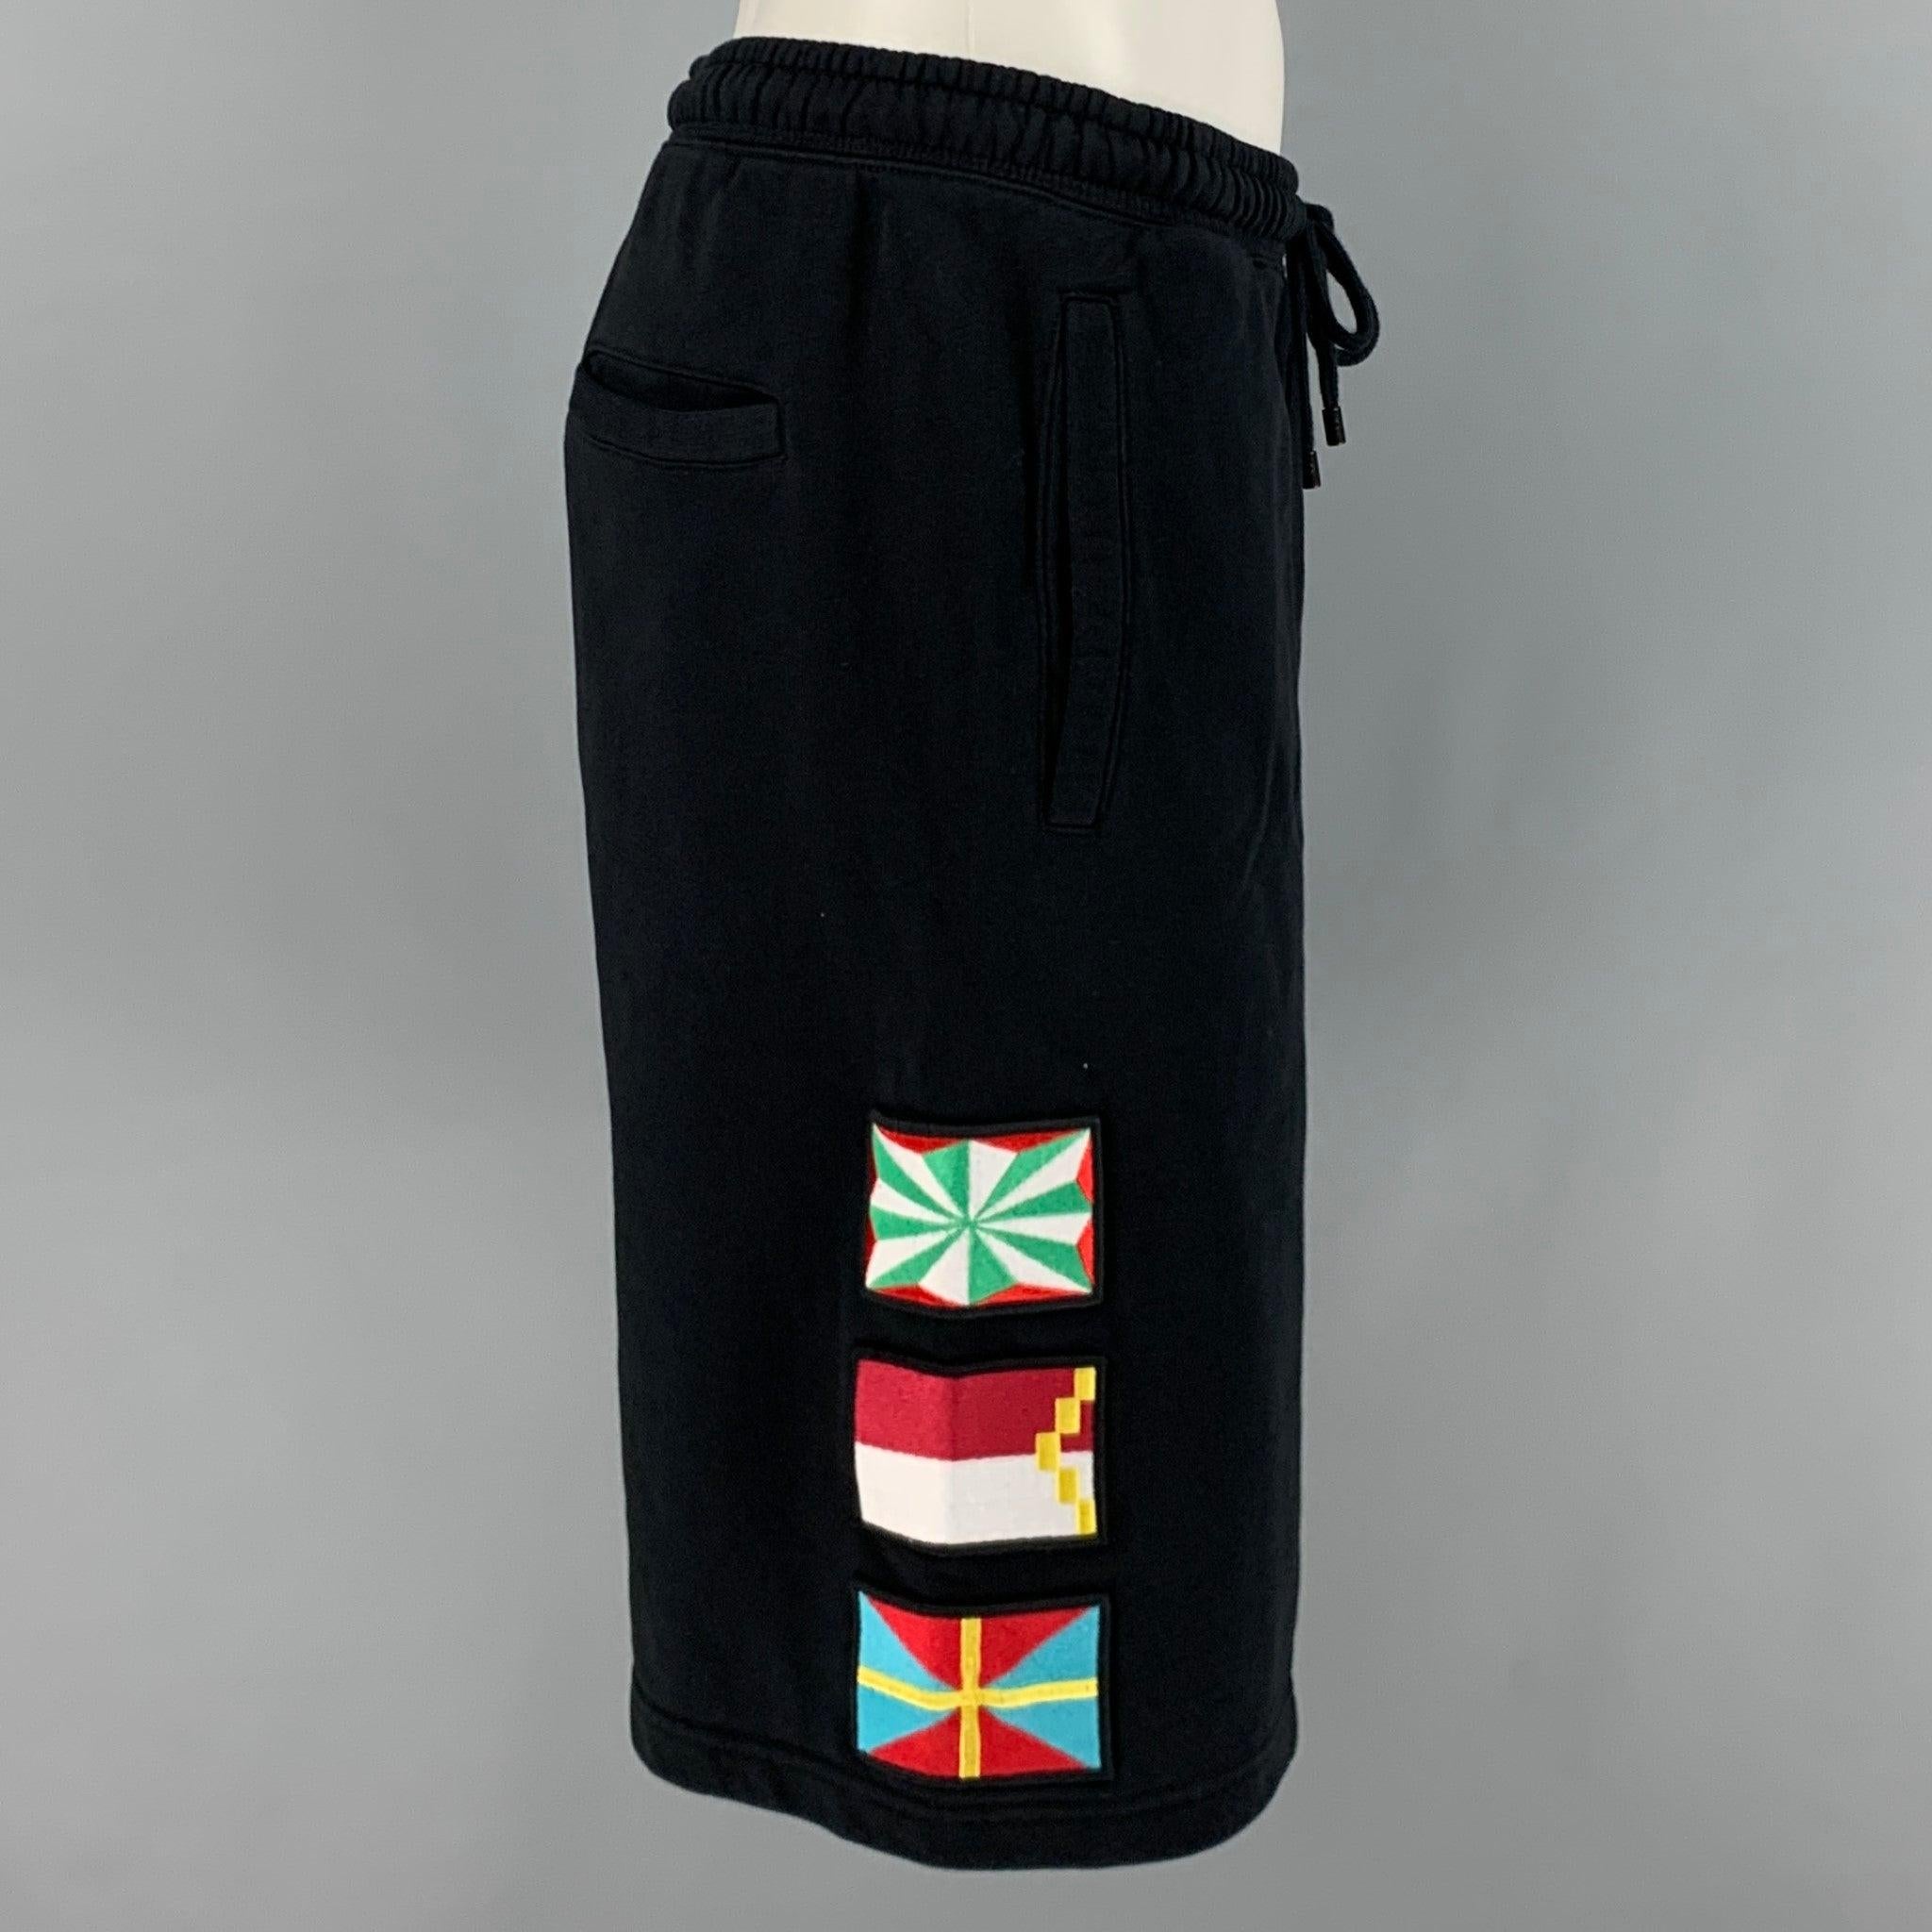 MARCELO BURLON shorts
in a
black cotton fabric featuring multi-color flag appliques, relaxed fit, and drawstring waist. This item has been altered. Made in Portugal.Very Good Pre-Owned Condition. Minor marks. 

Marked:   S 

Measurements: 
  Waist: